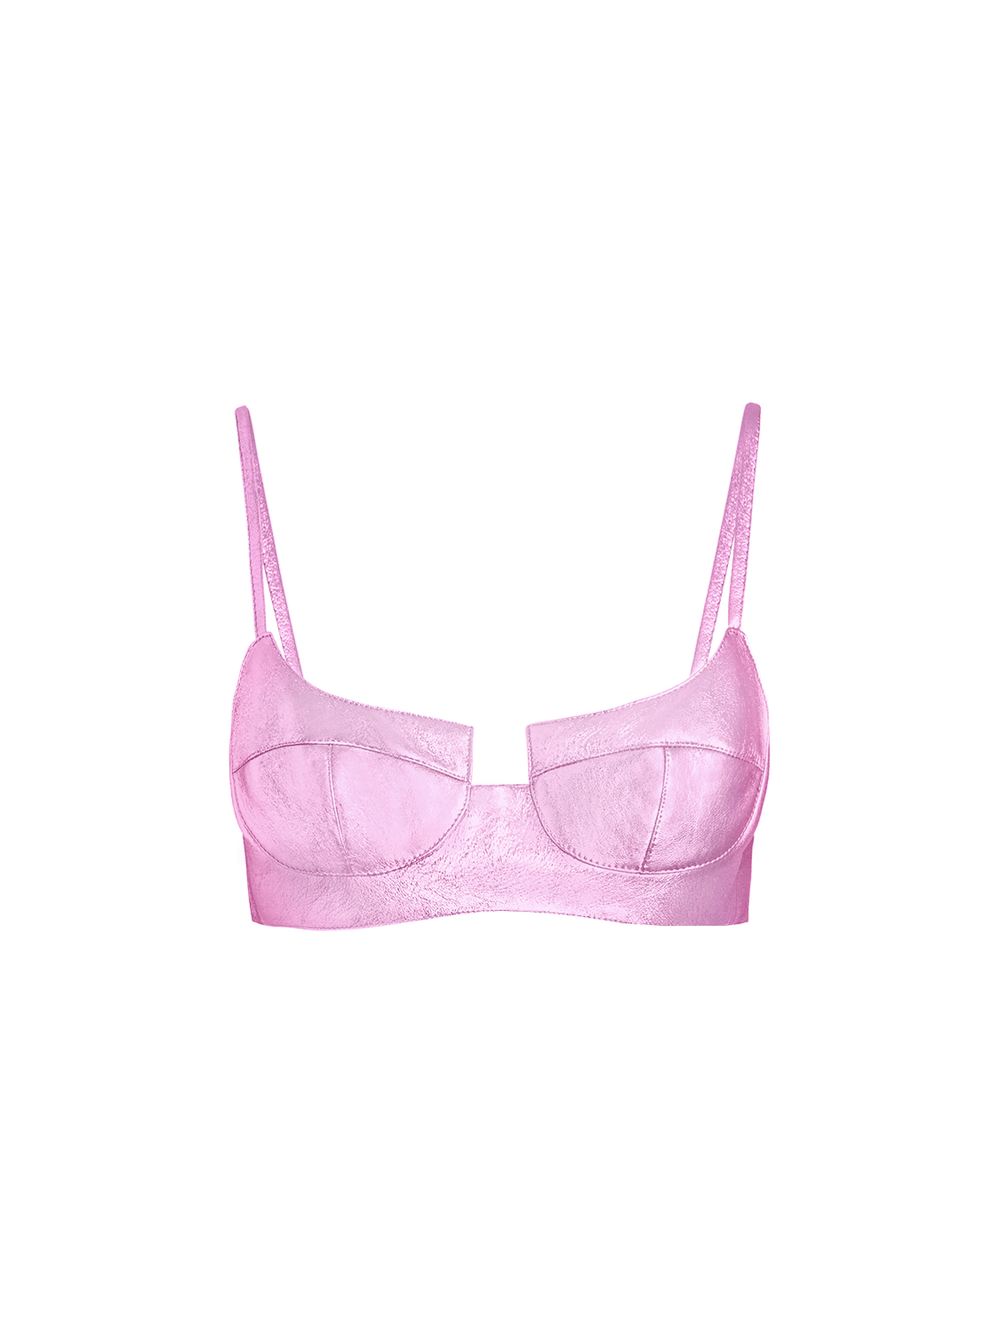 Pink TOP RATED Bras